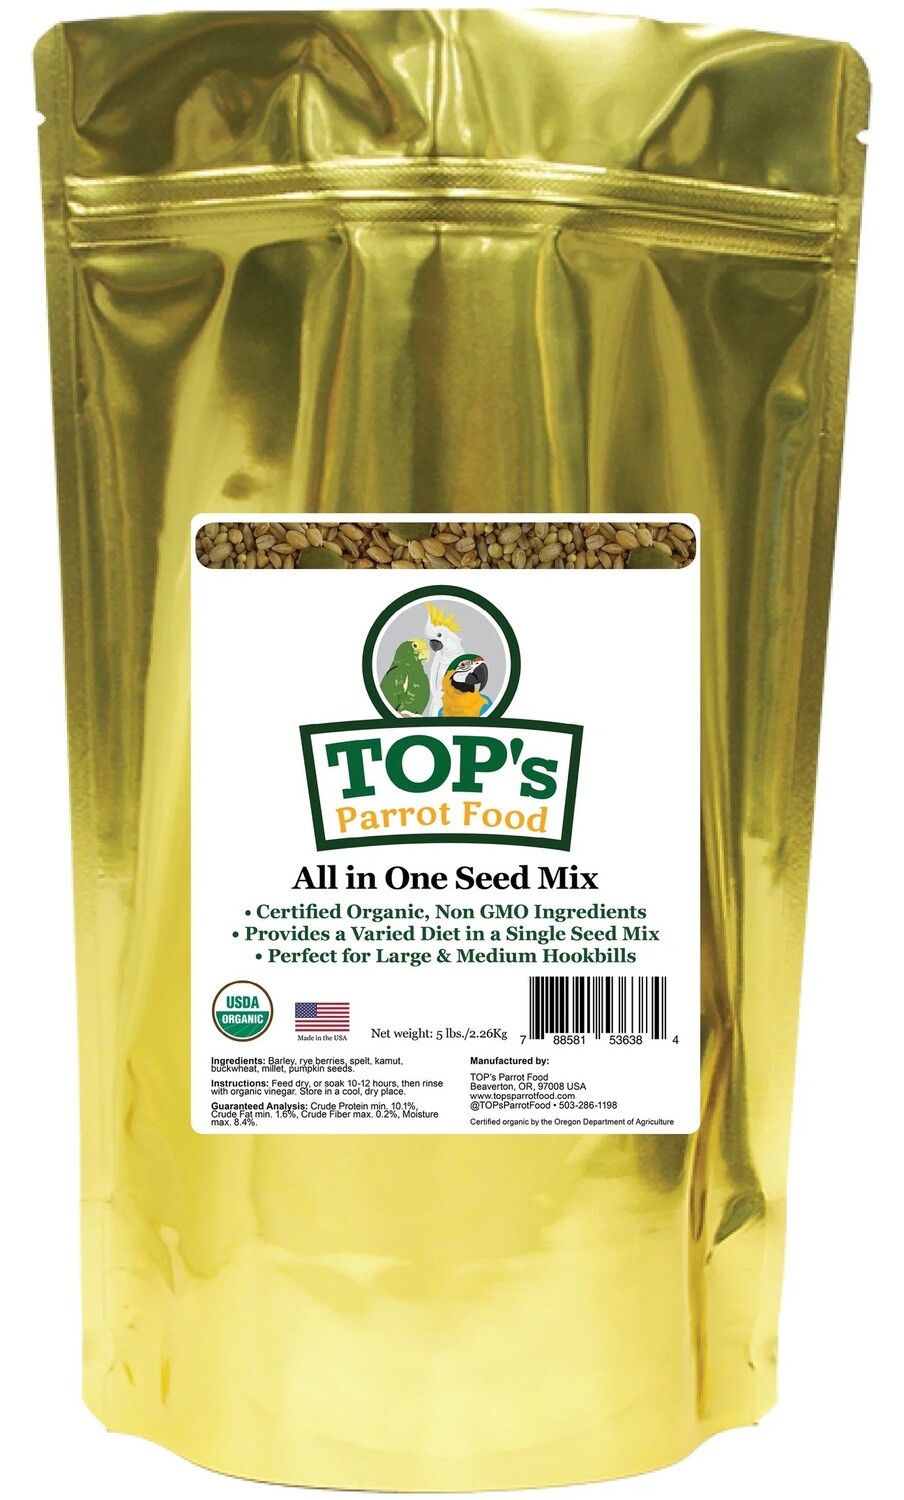 Tops Parrots Food 5 Lb USDA Organic All in One Seed Mix